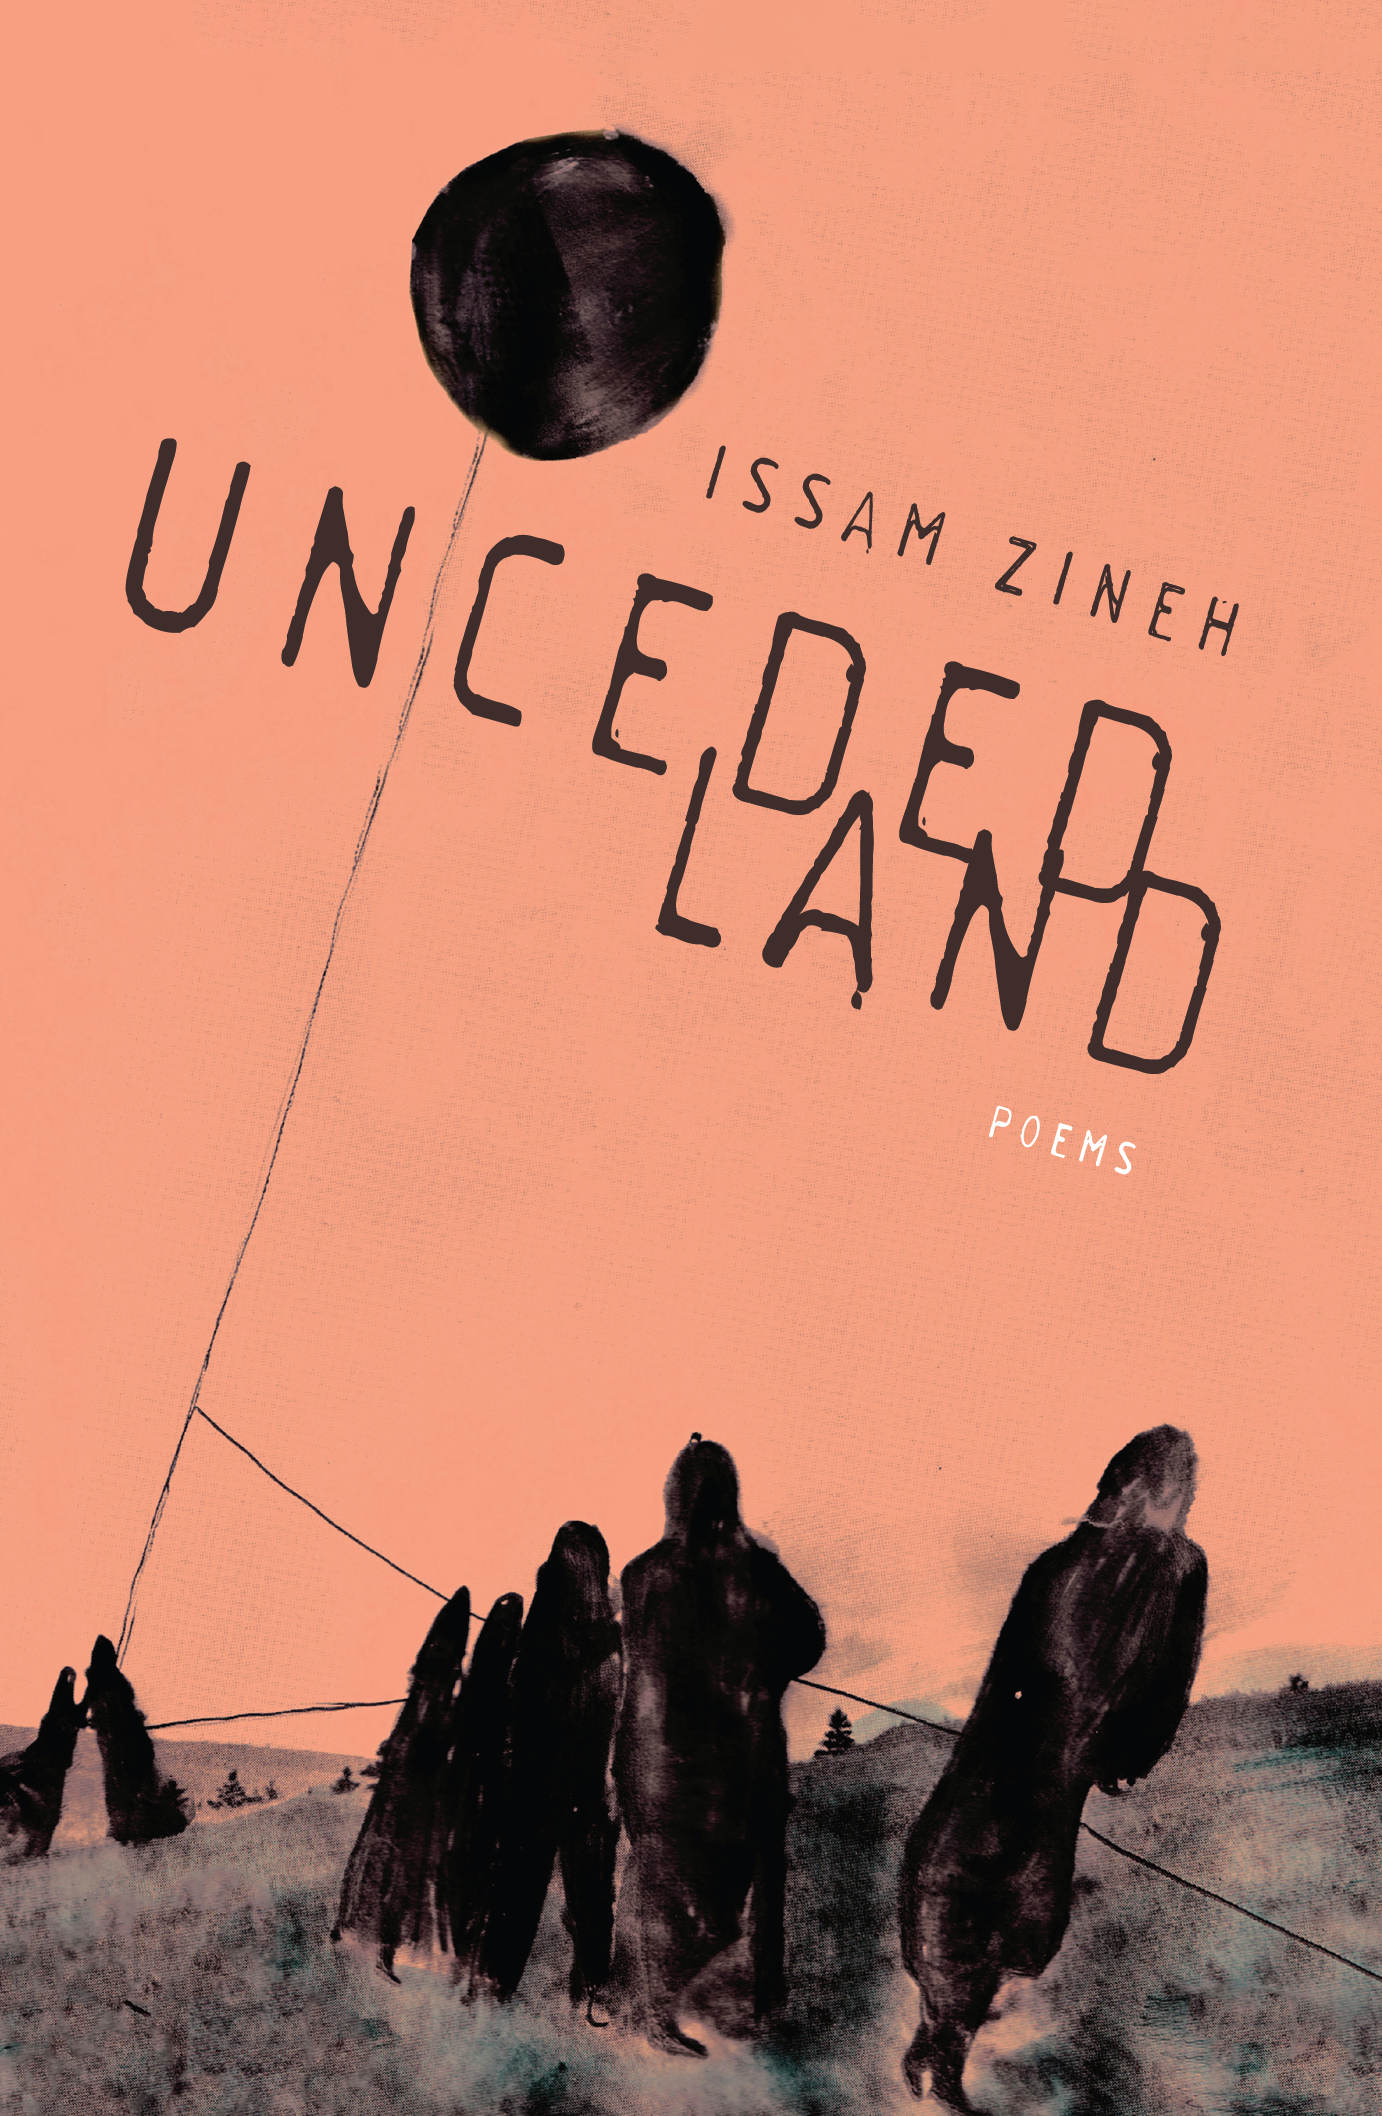 Unceded Land by Issam Zineh